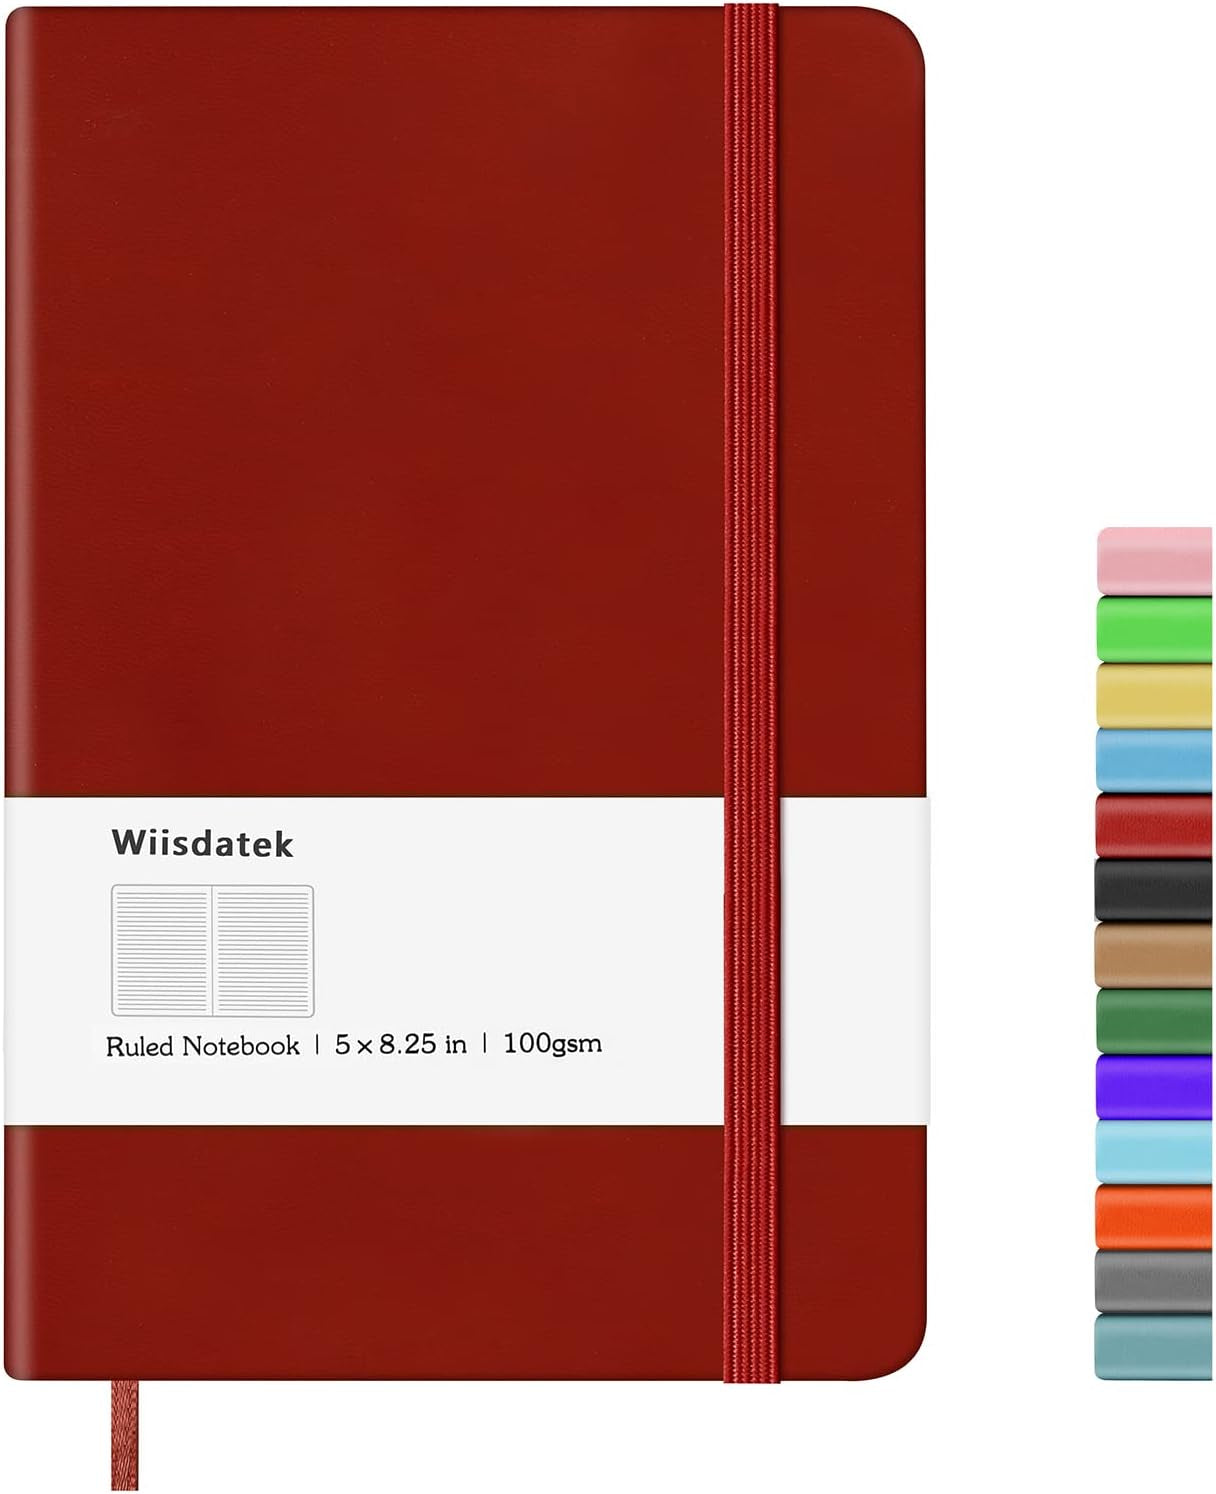 Notebook Journal, Lined Hard Cover,100Gsm Premium Thick Paper with Inner Pocket for Writing Note Taking Office School,5"×8.25"(Pink)